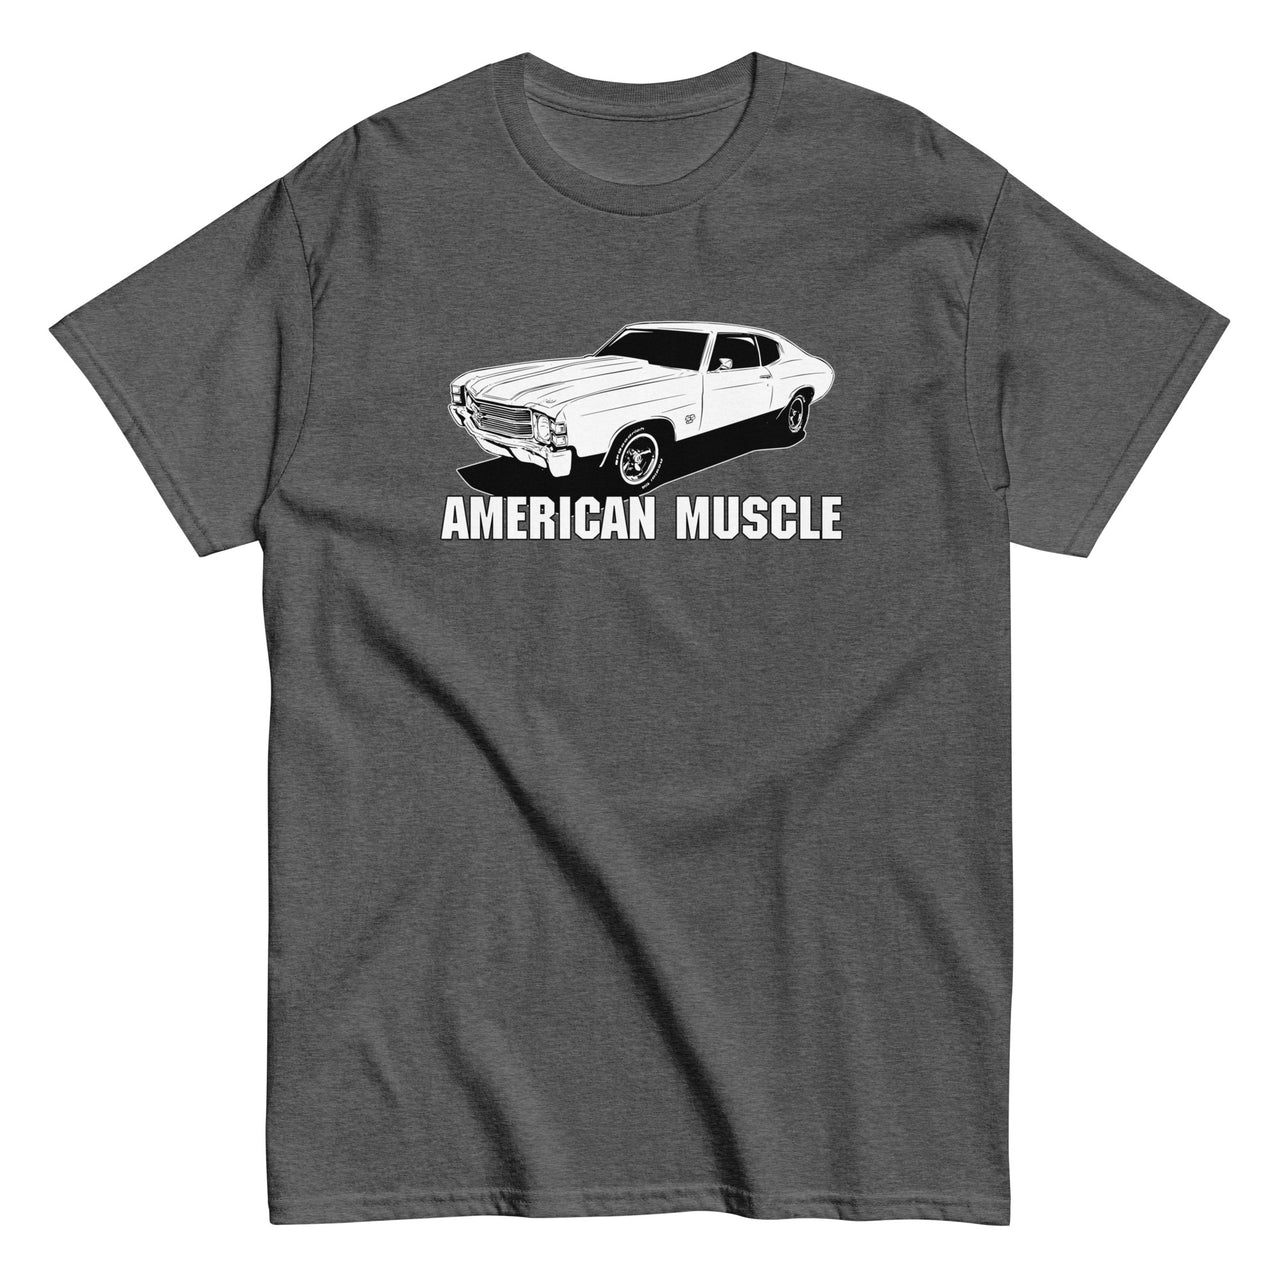 1971 Chevelle T-Shirt in grey